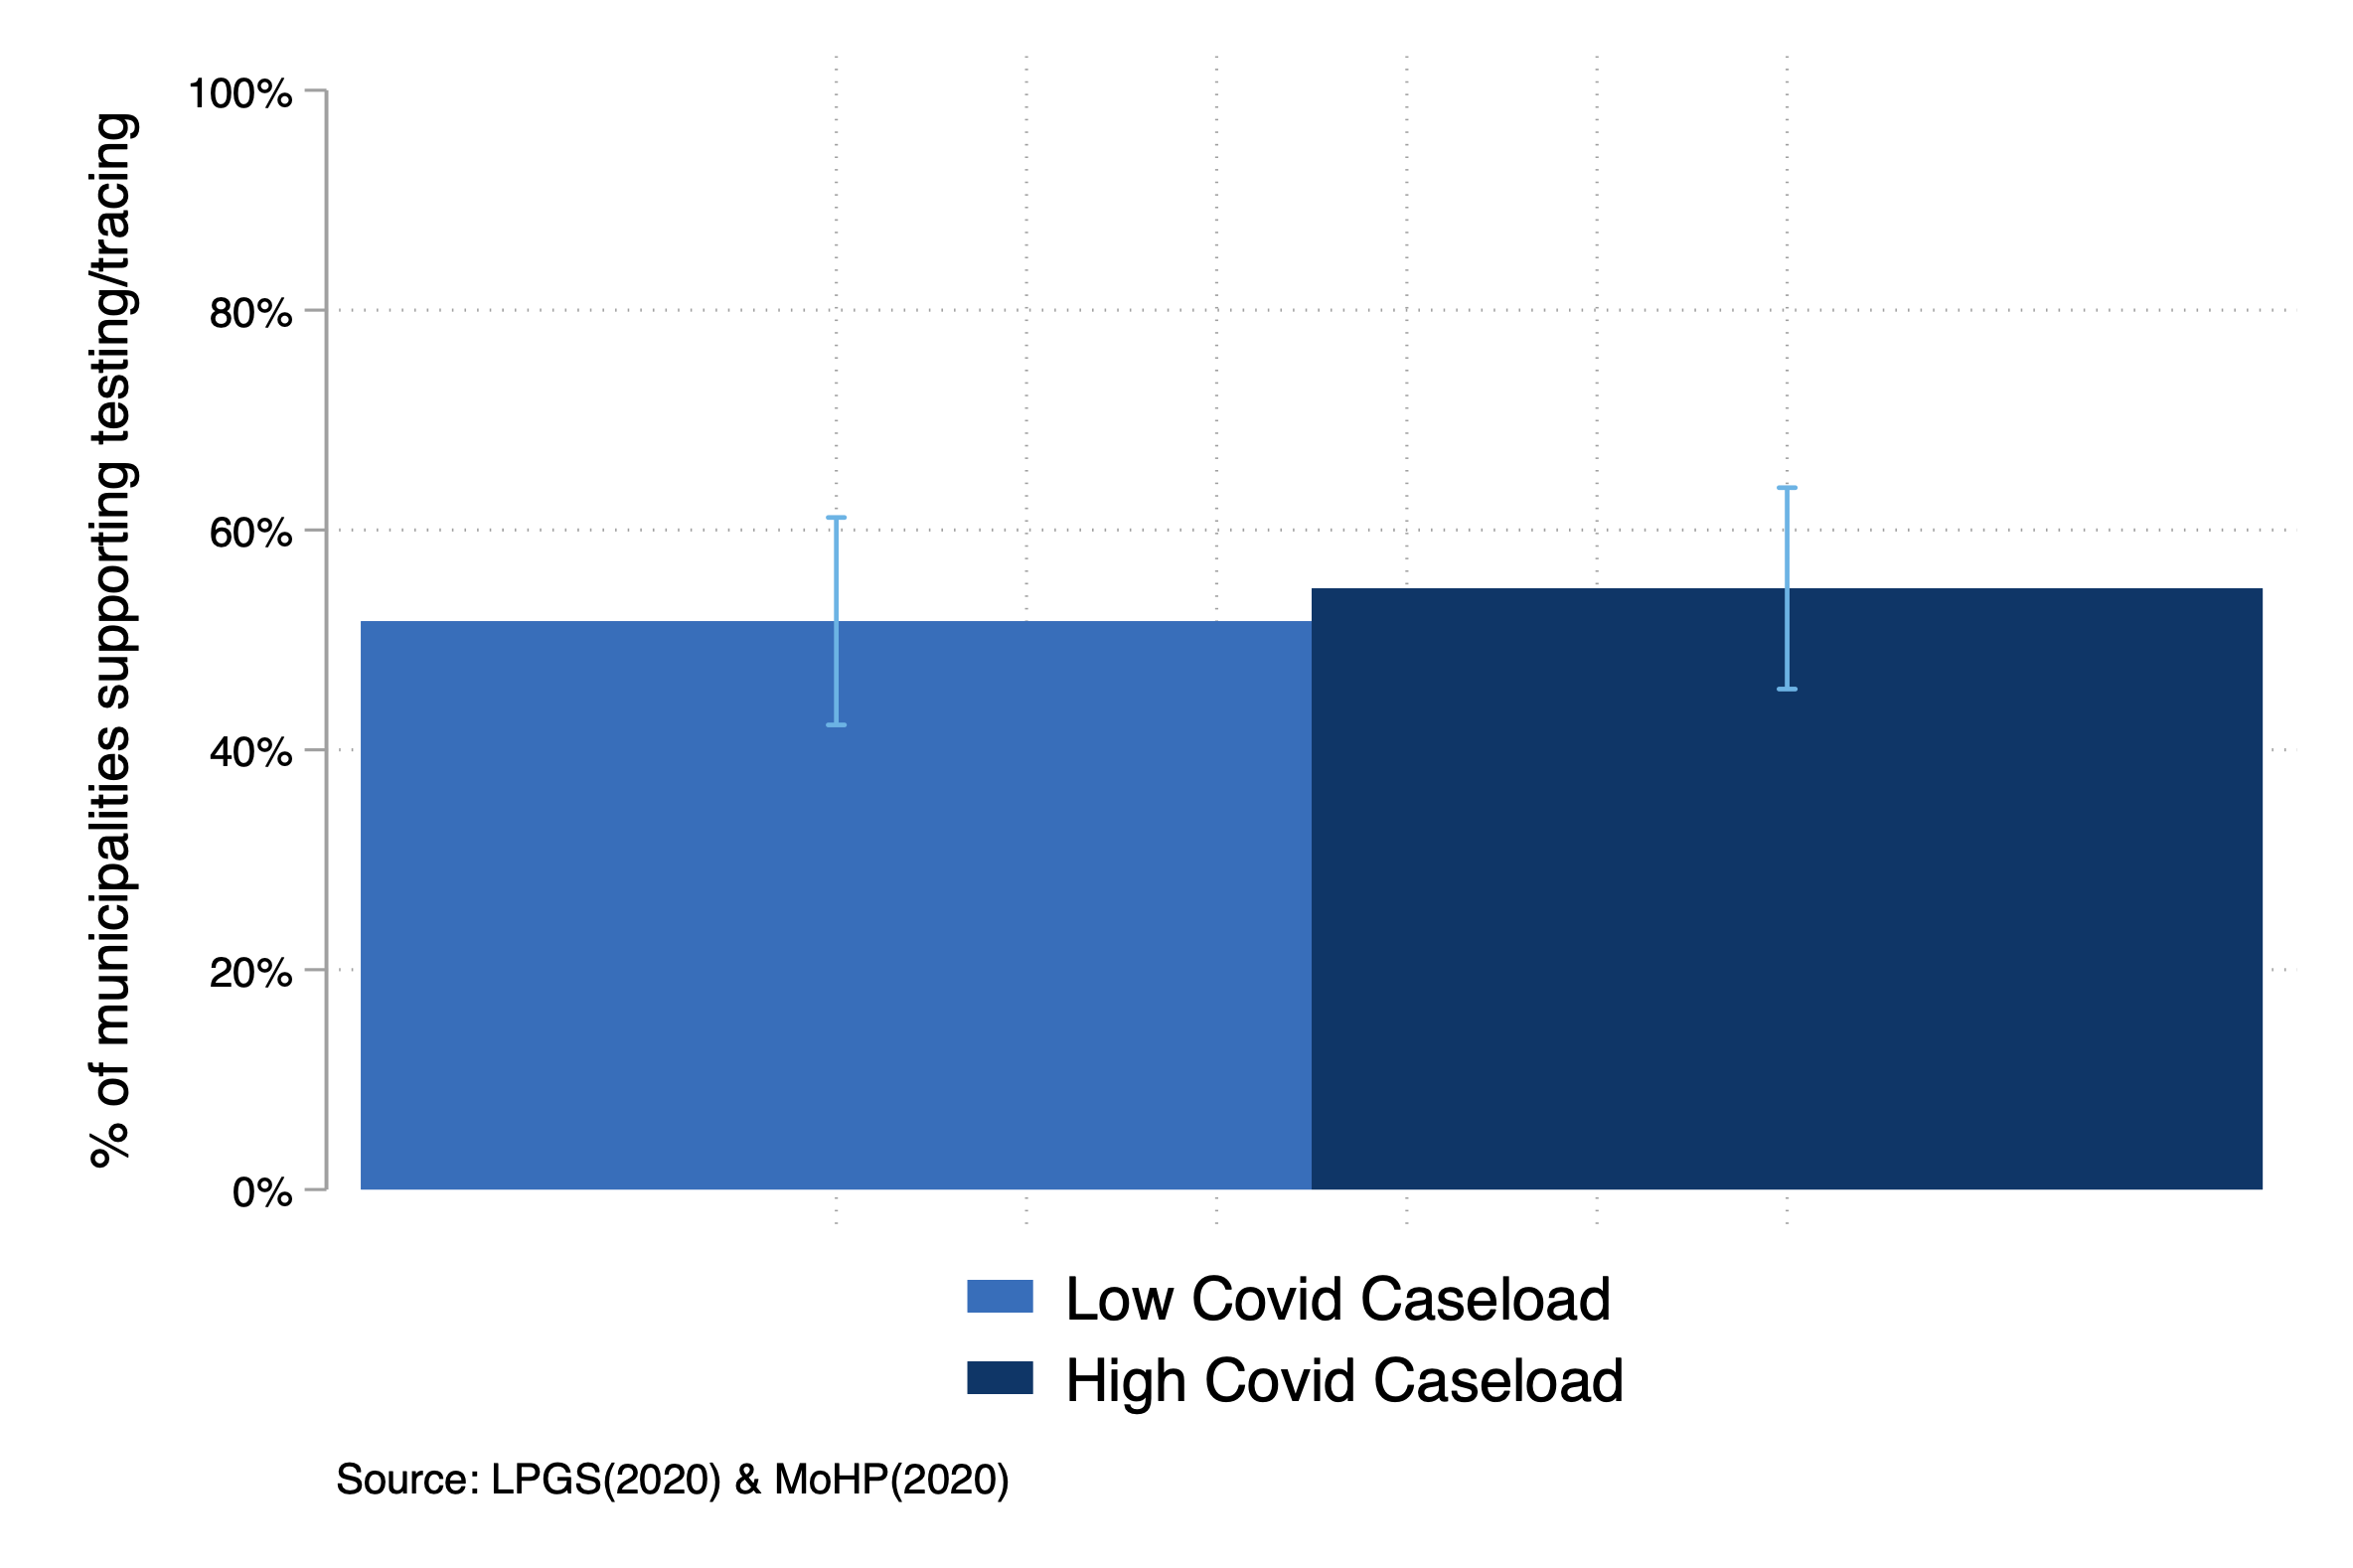 Bar chart showing % of municipalities supporting testing/tracing by low covid and high covid caseloads